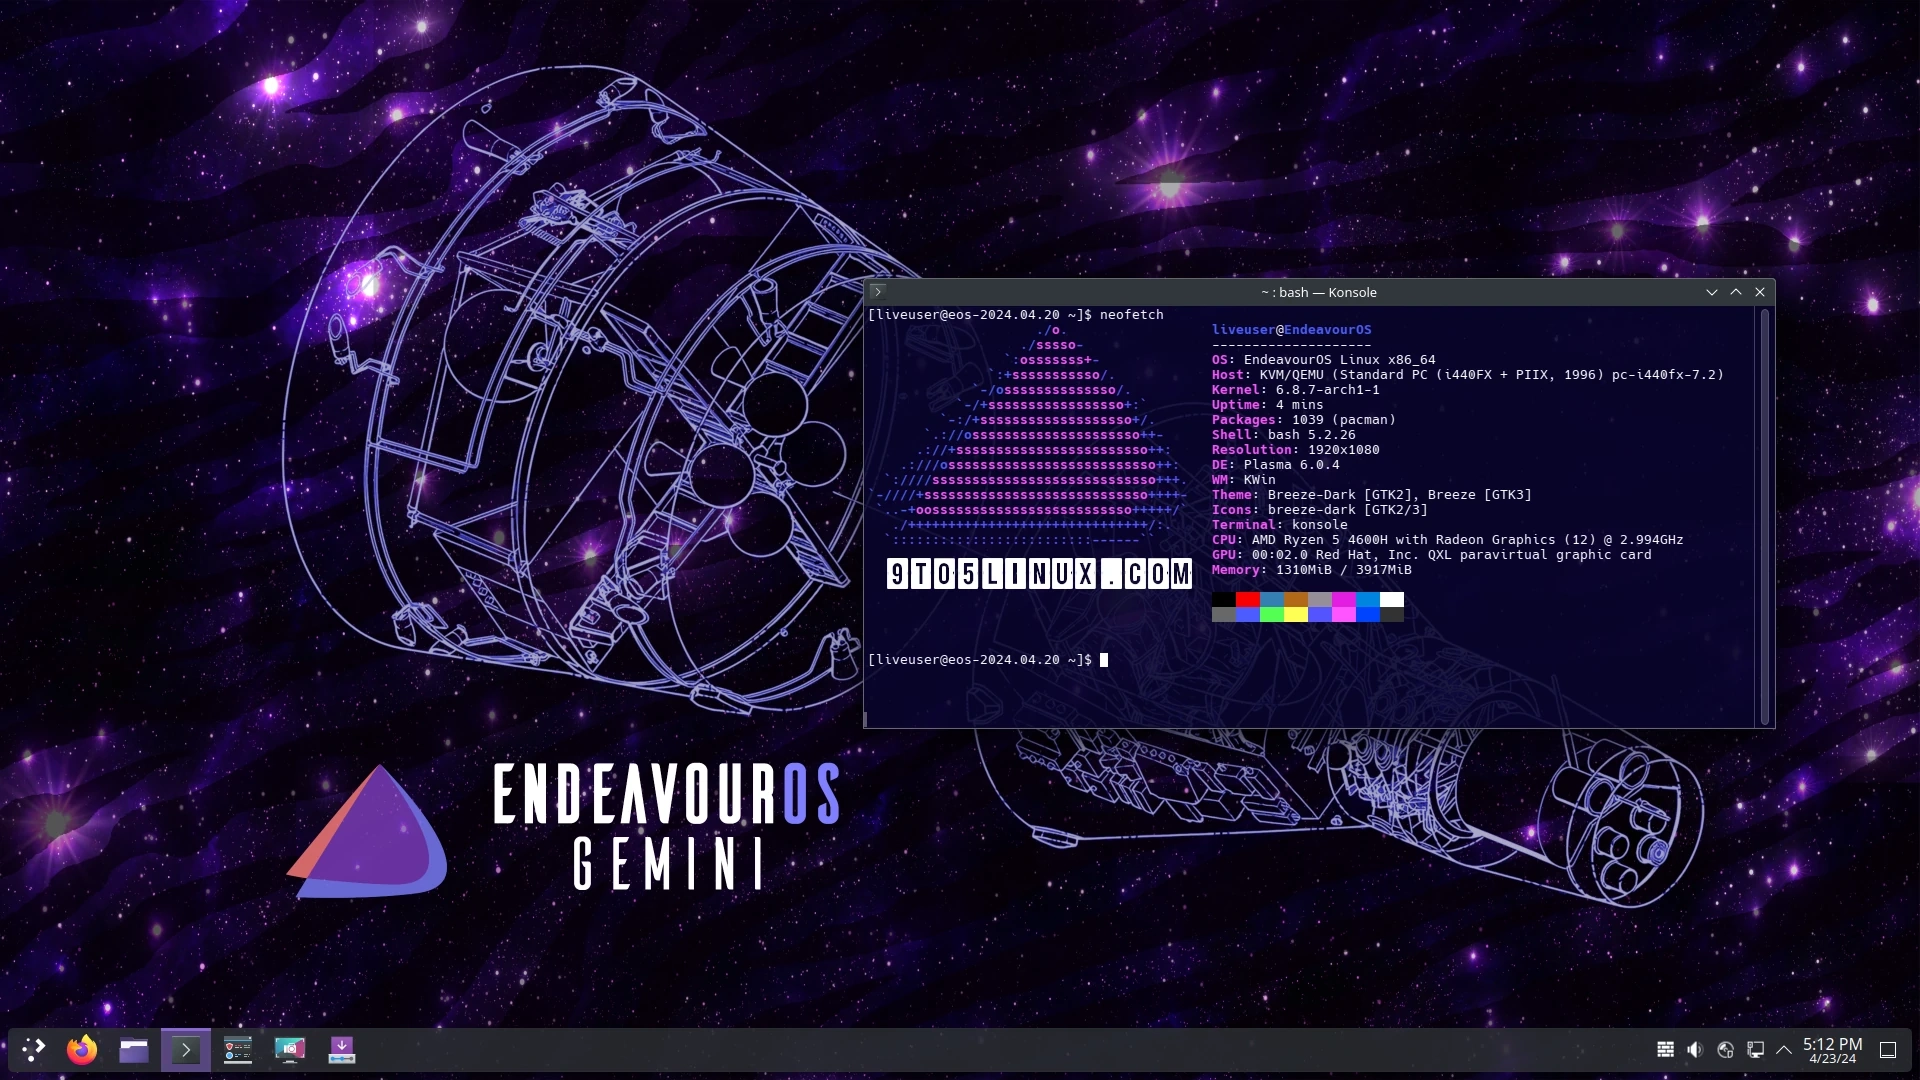 Introducing EndeavourOS Gemini: Equipped with the New KDE Plasma 6 Desktop Environment